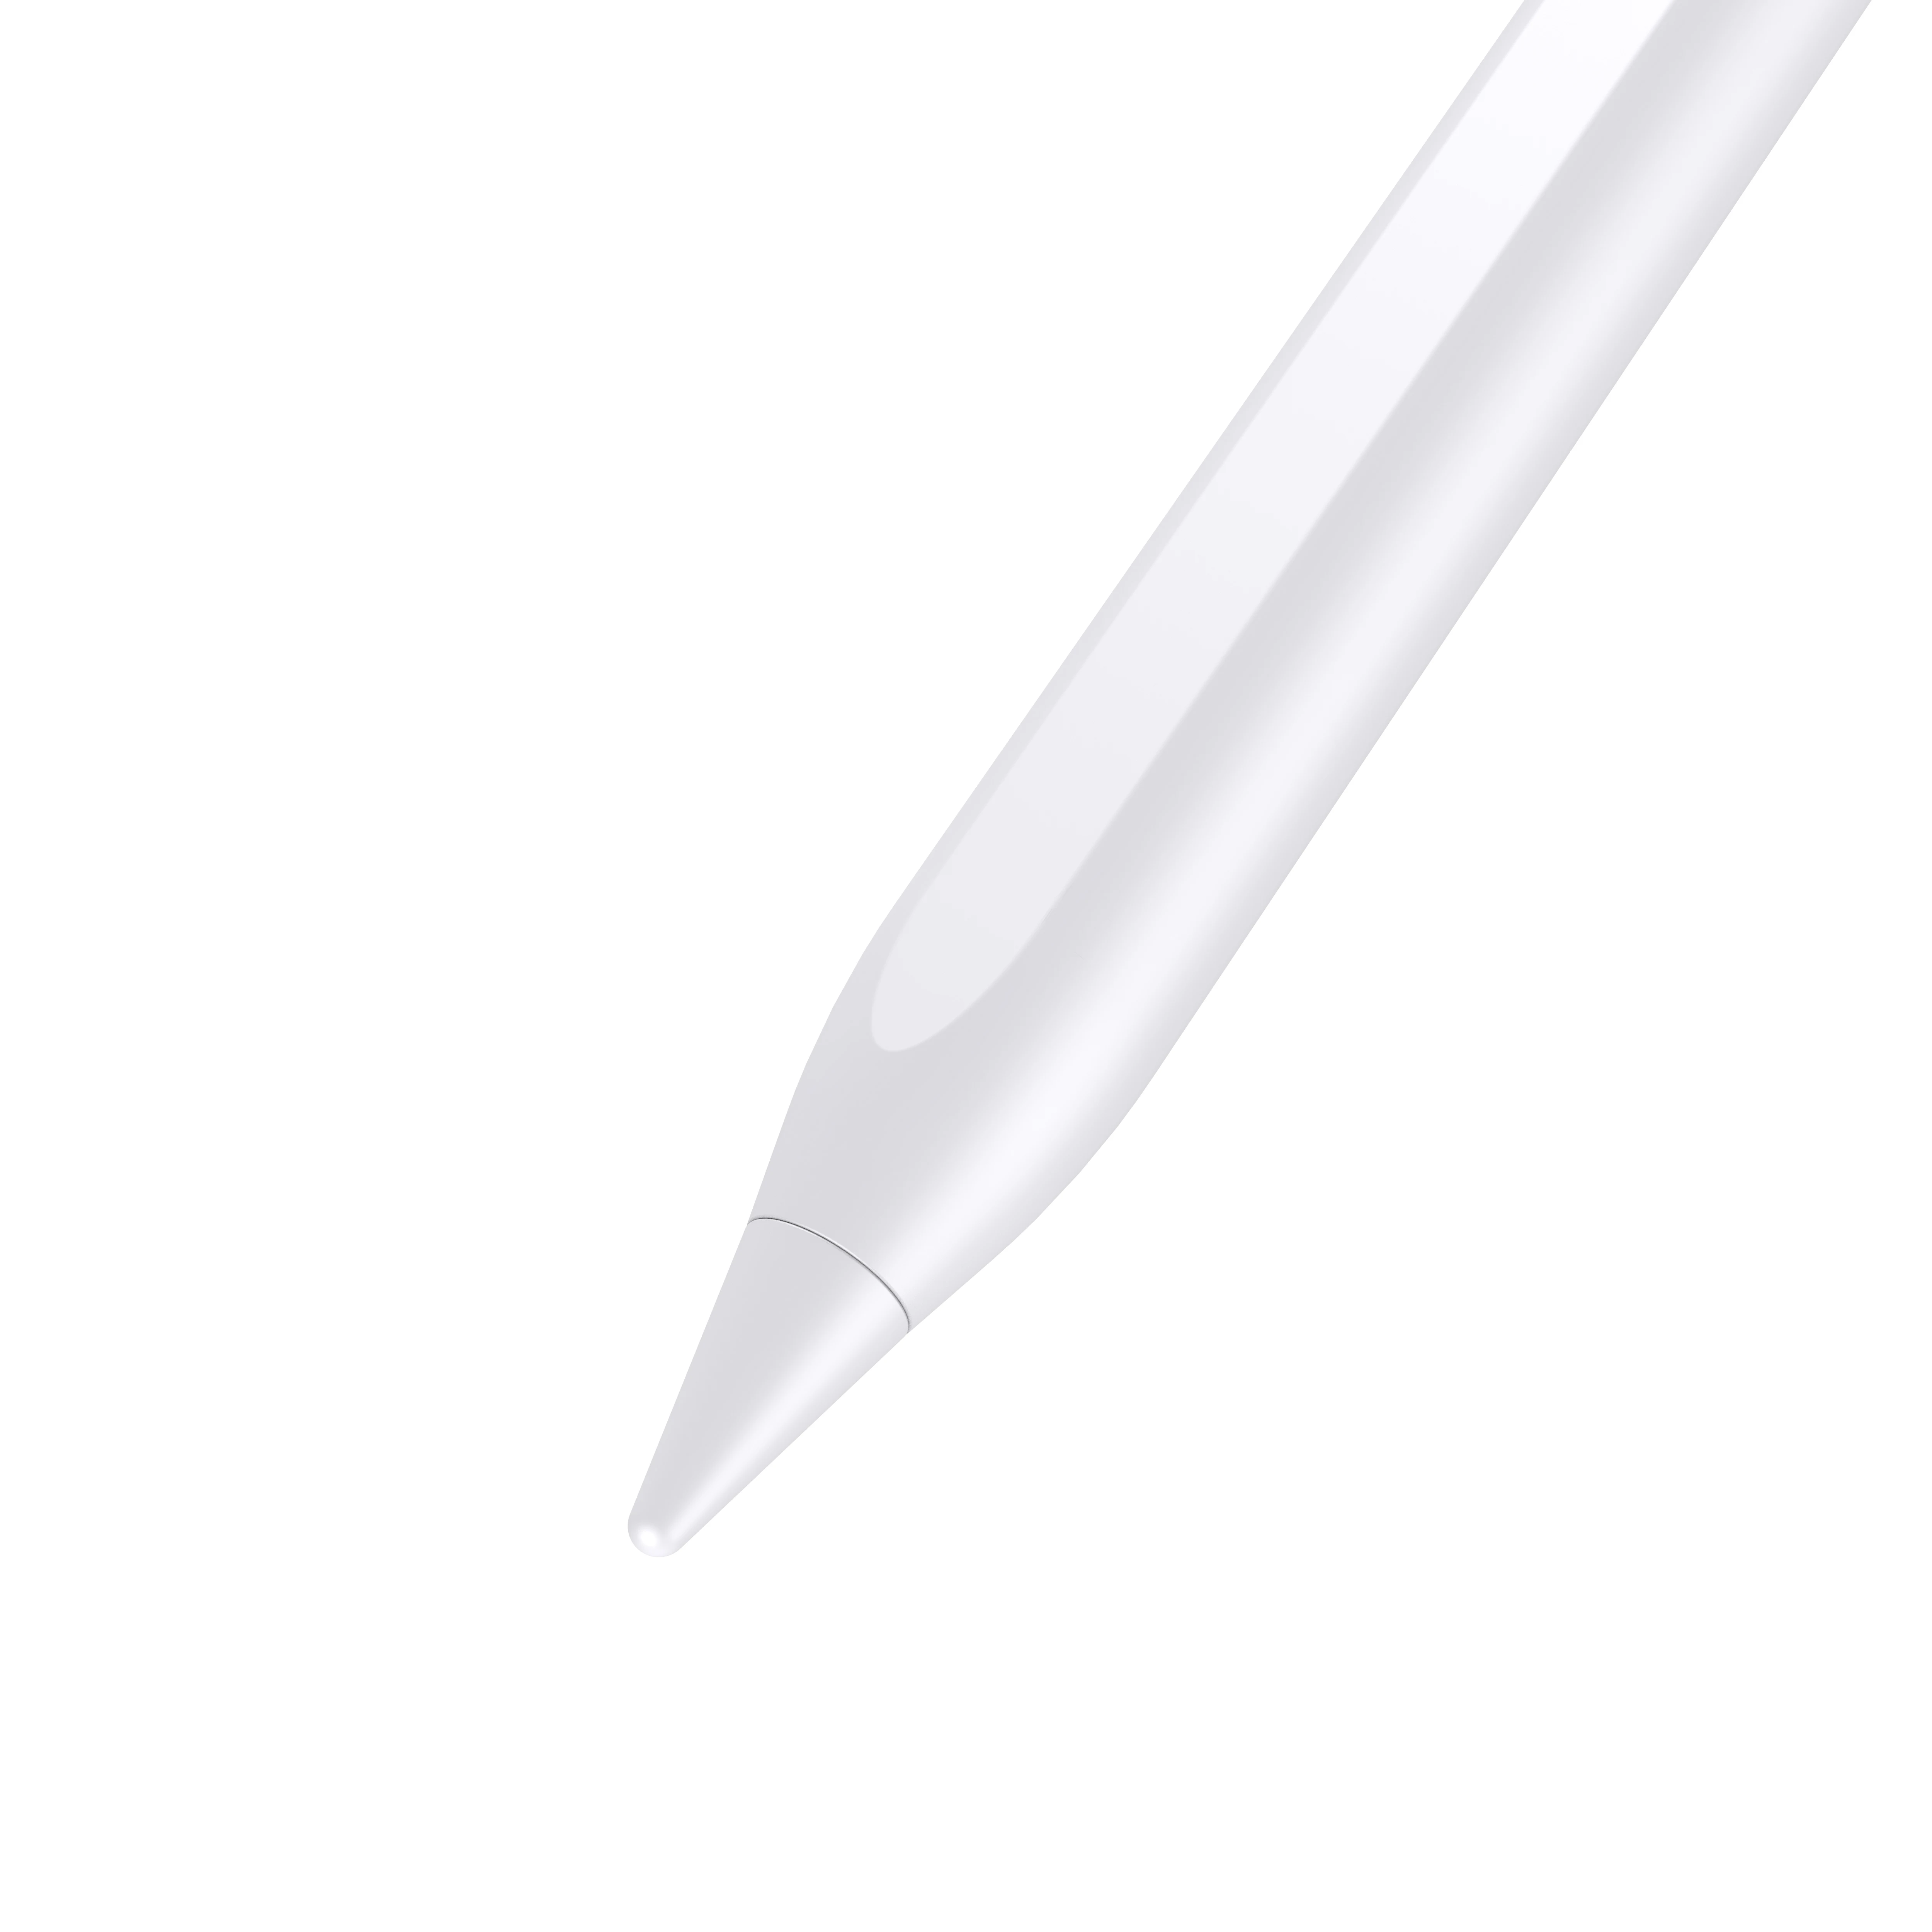 

ipad pencil palm rejection active stylus pen for Apple pencil 2 iPad 2018 and 2019 6th 7th gen /pro 3rd /mini, White